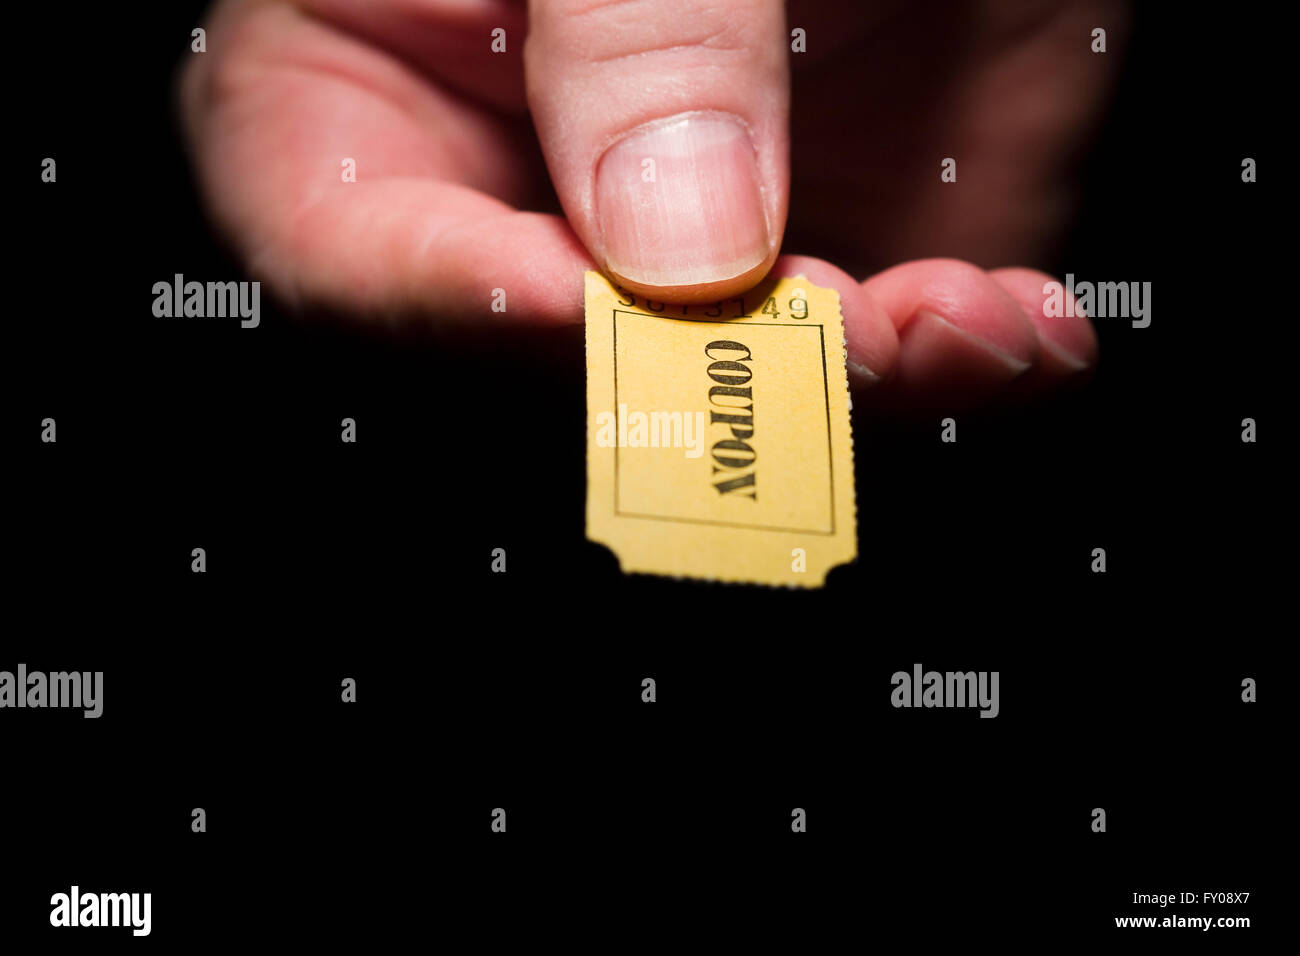 A man's right hand holding a yellow 7-digit ticket marked with the word 'COUPON' black ink Stock Photo